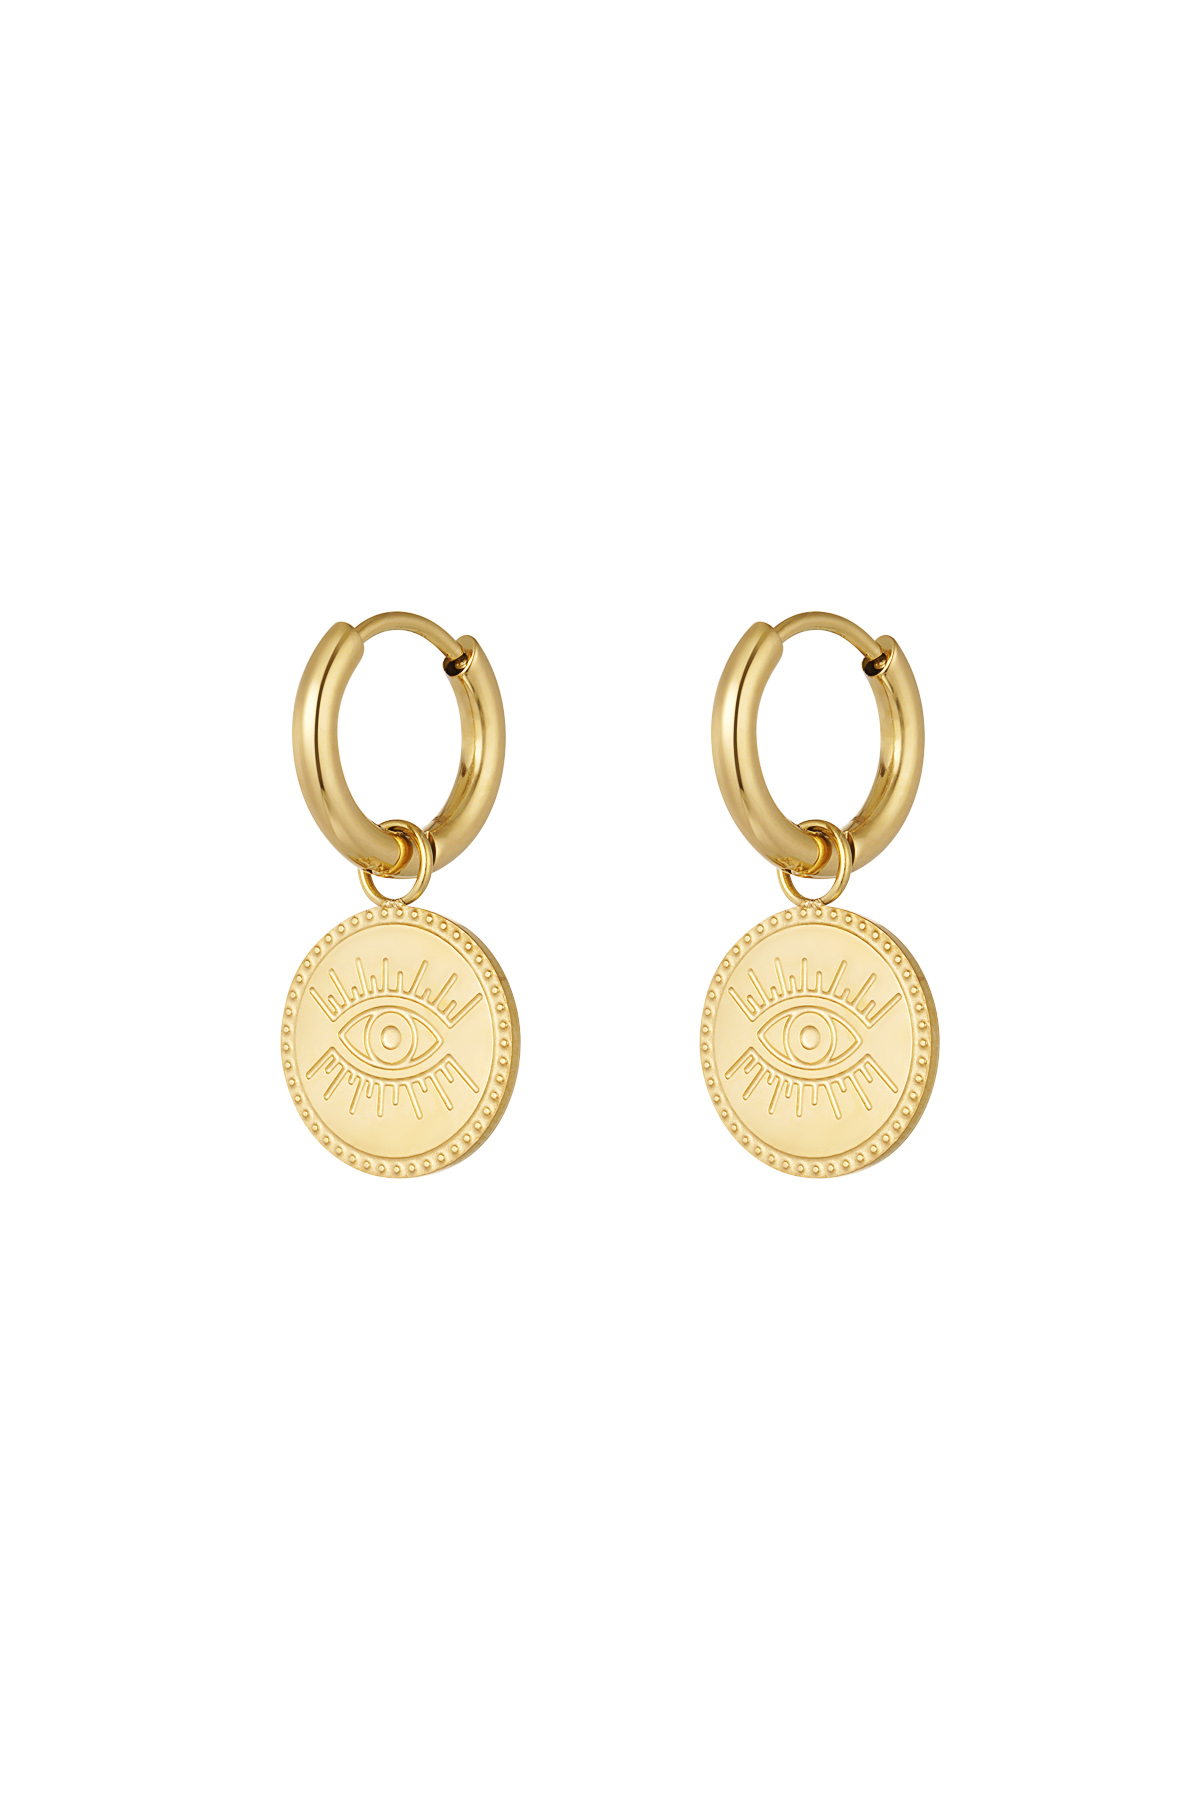 Earrings minimalist round with eye - gold 